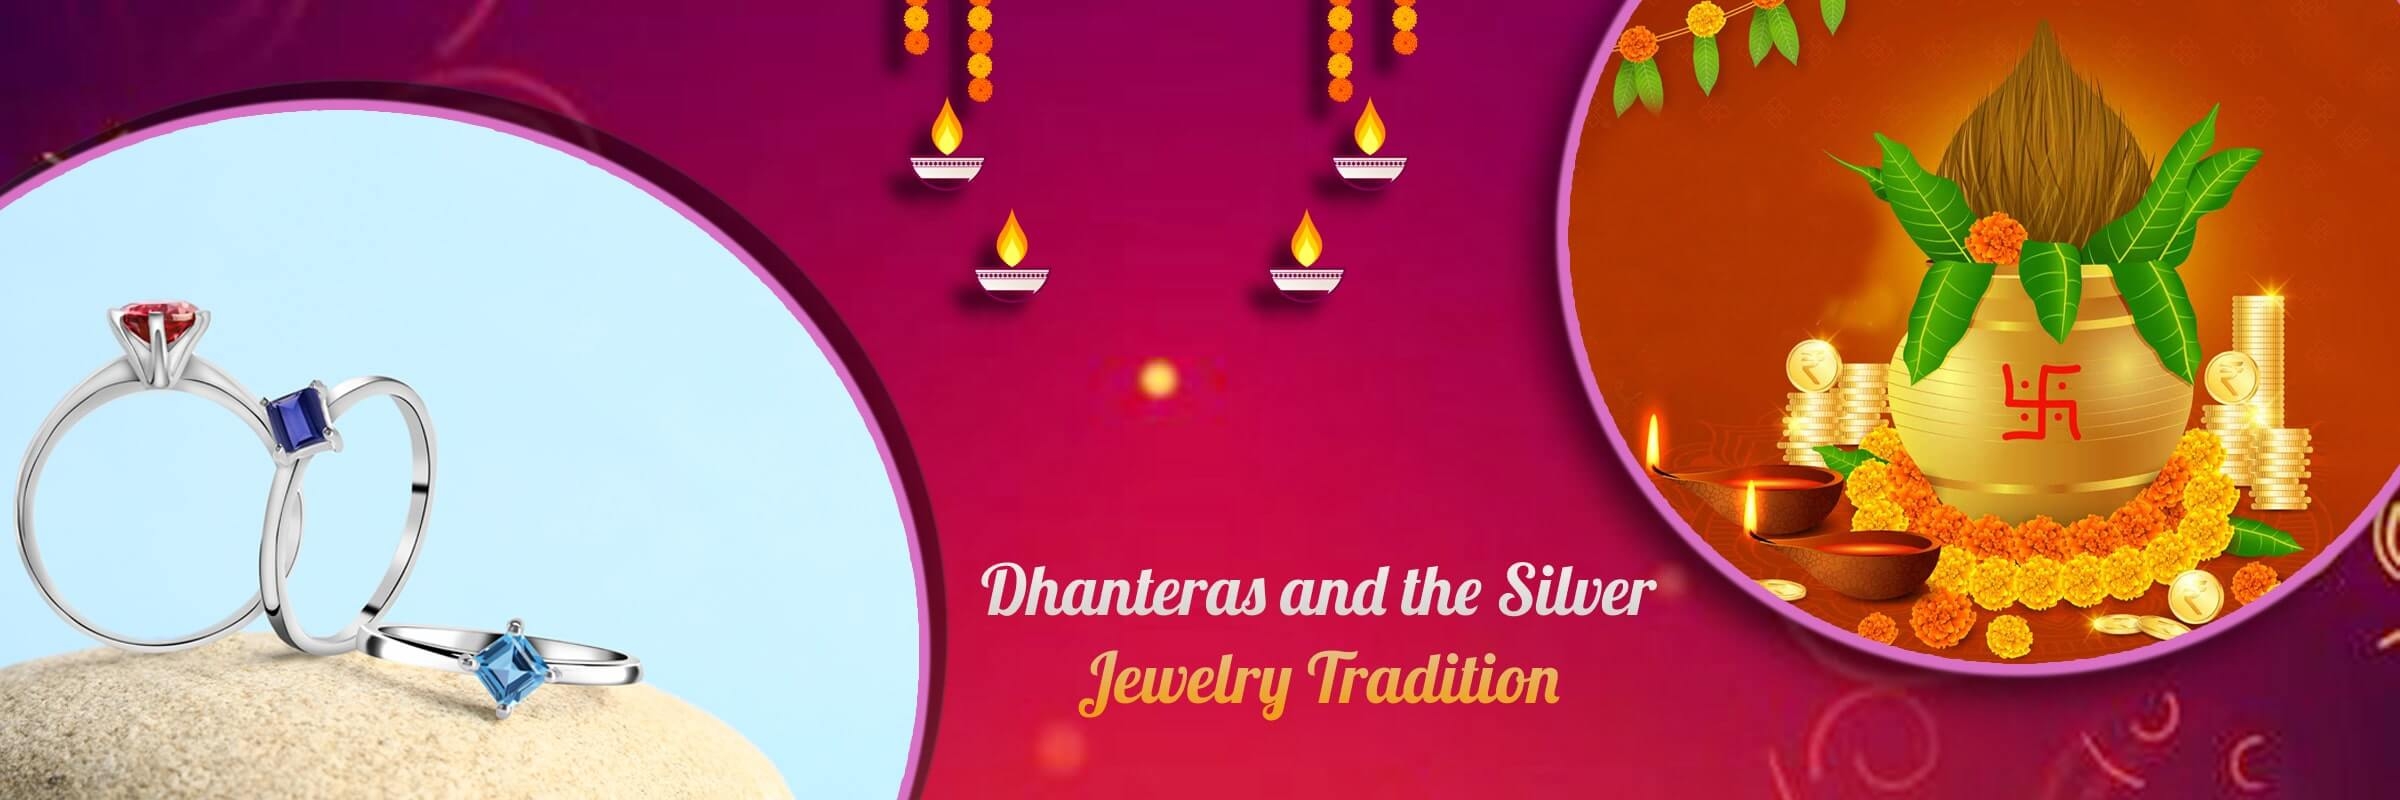 Why Buy 925 Sterling Silver Jewelry on Dhanteras?